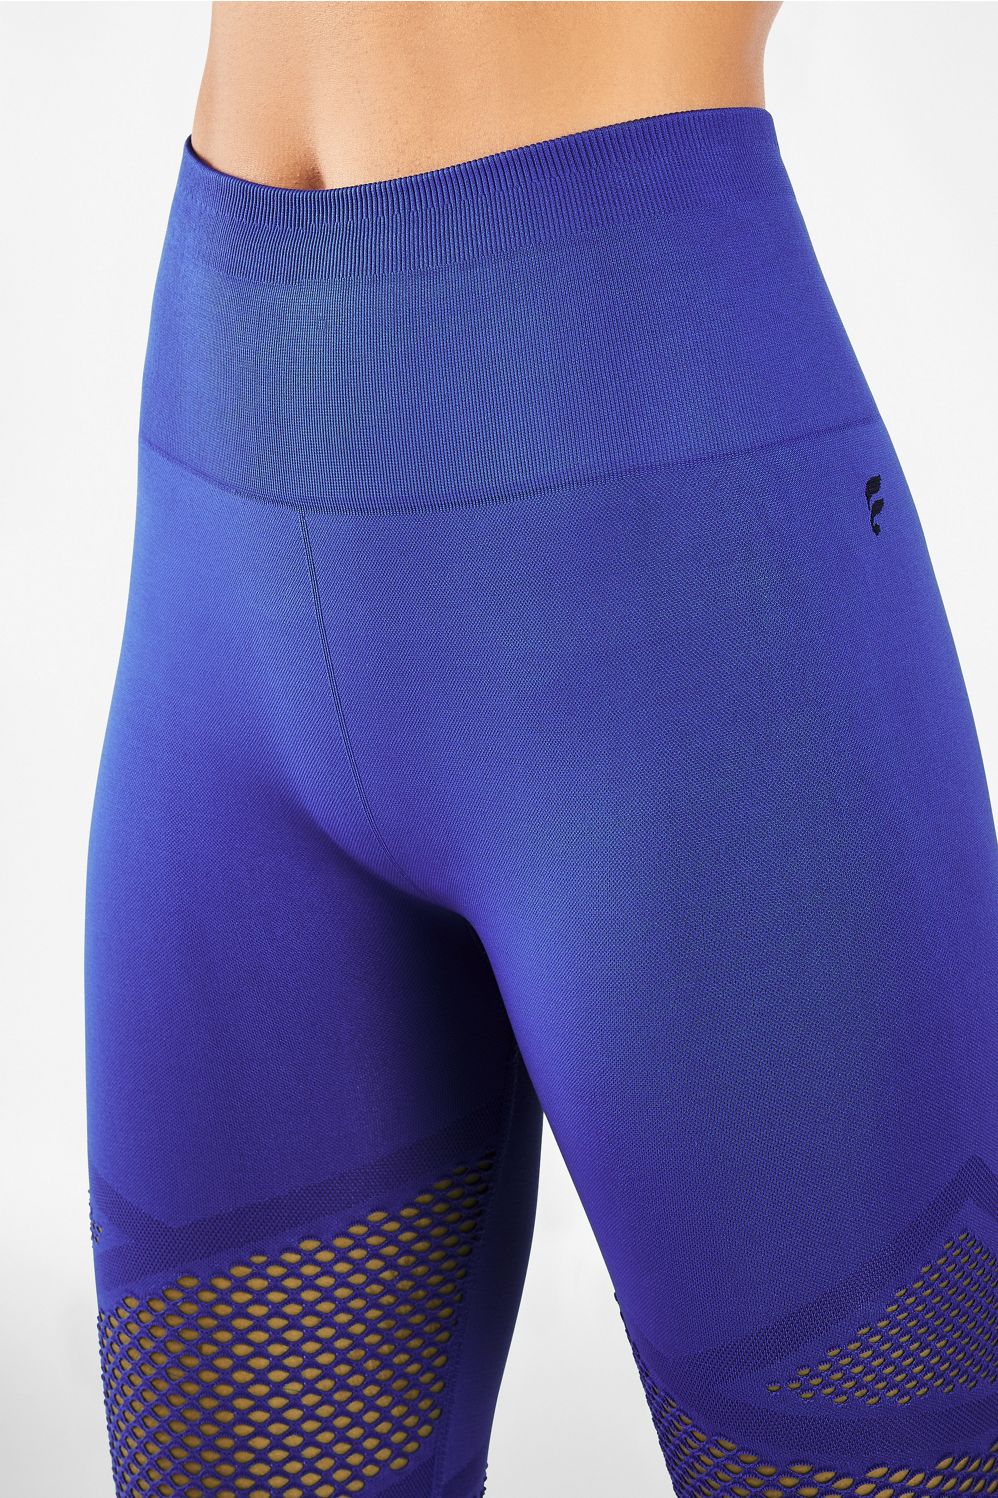 Fabletics Mosaic Perforated High-Waisted 7/8 Leggings Lapis Blue